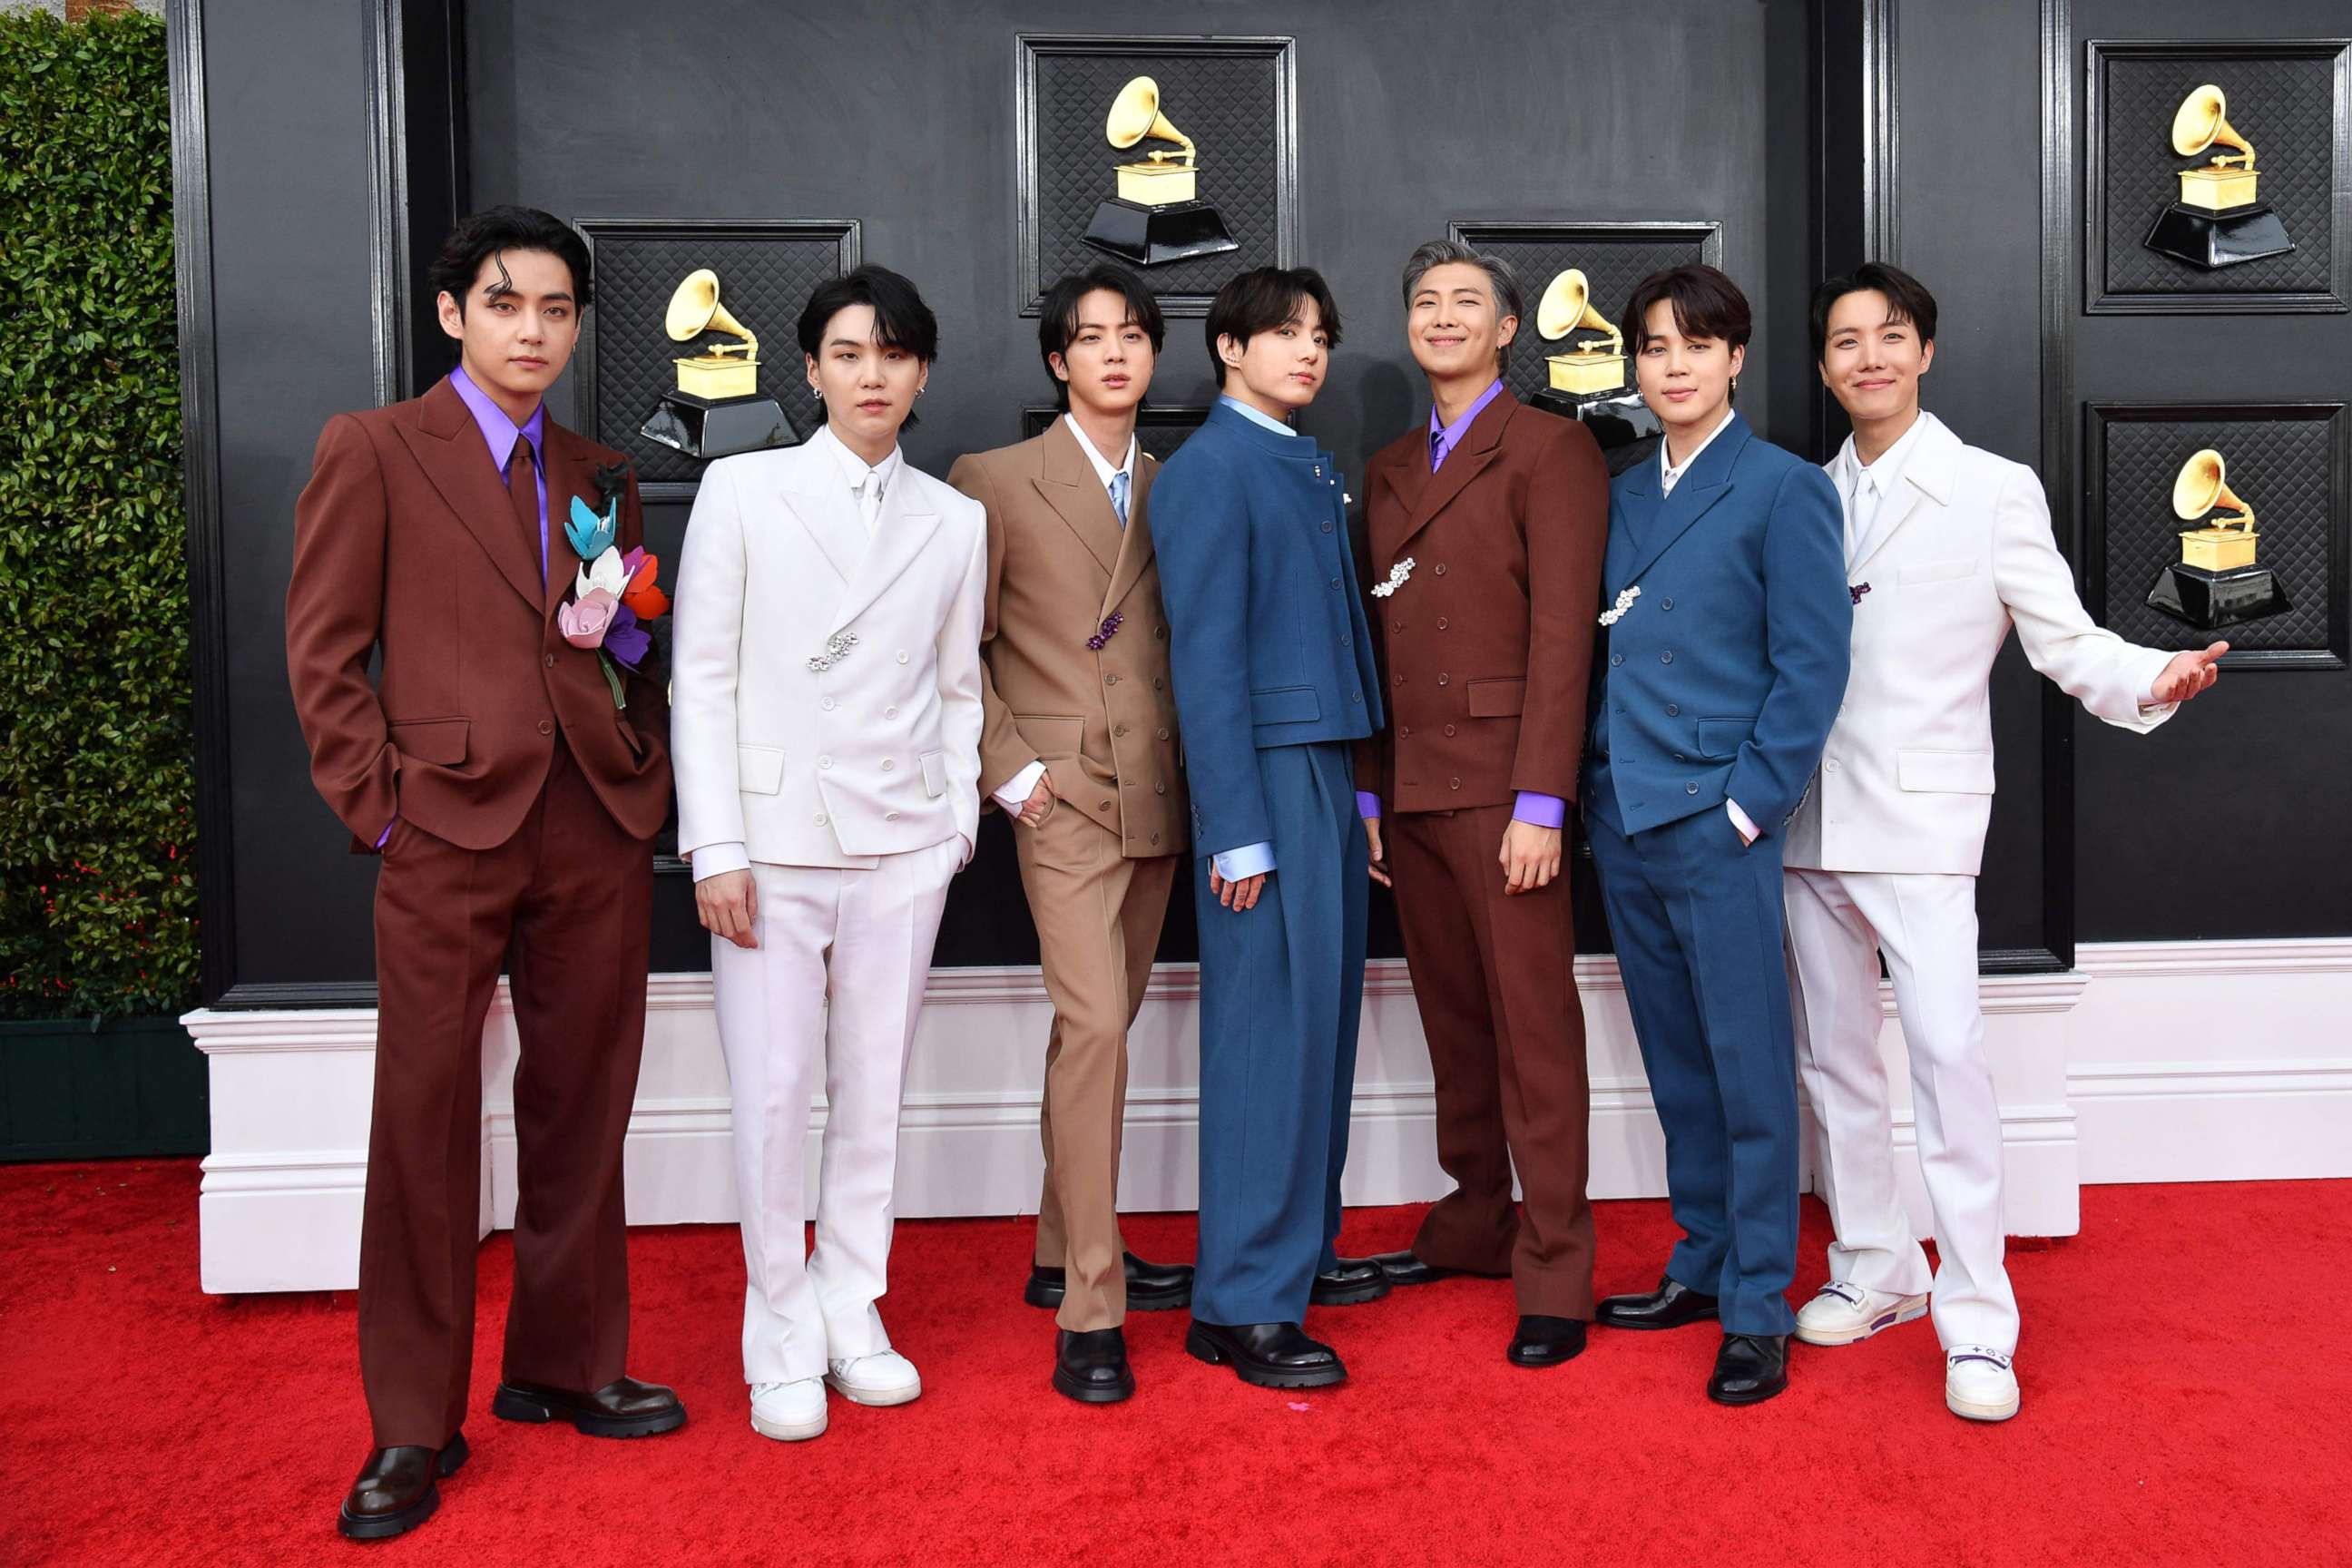 PHOTO: BTS arrives for the 64th Annual Grammy Awards at the MGM Grand Garden Arena in Las Vegas, April 3, 2022.